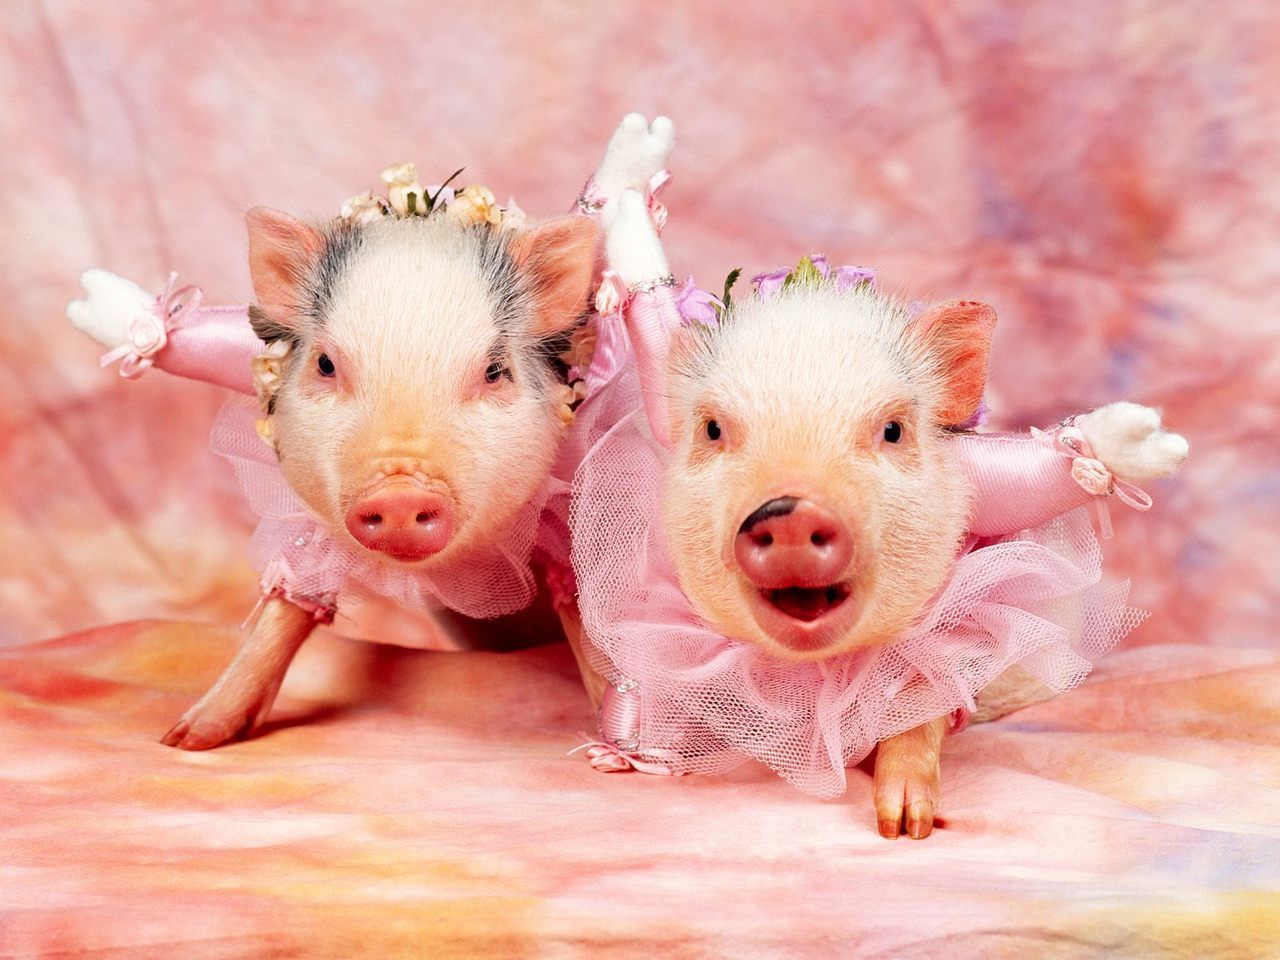 cute ballet piggies. Funny pig picture, Funny pigs, Cute baby animals